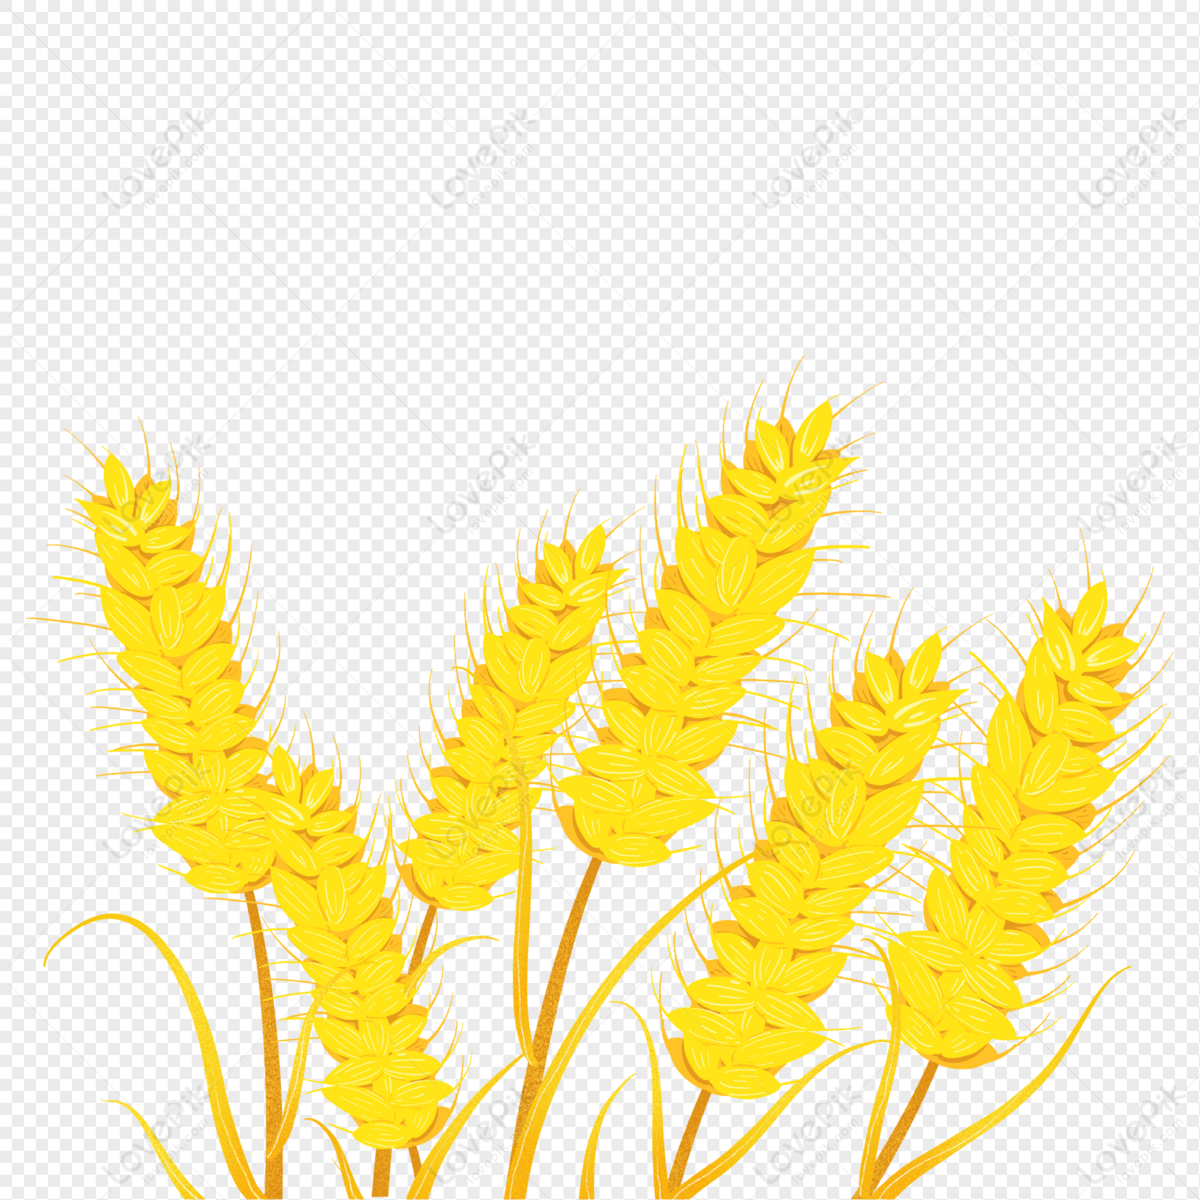 Cartoon Golden Yellow Wheat Illustration PNG Transparent And Clipart Image  For Free Download - Lovepik | 401531586